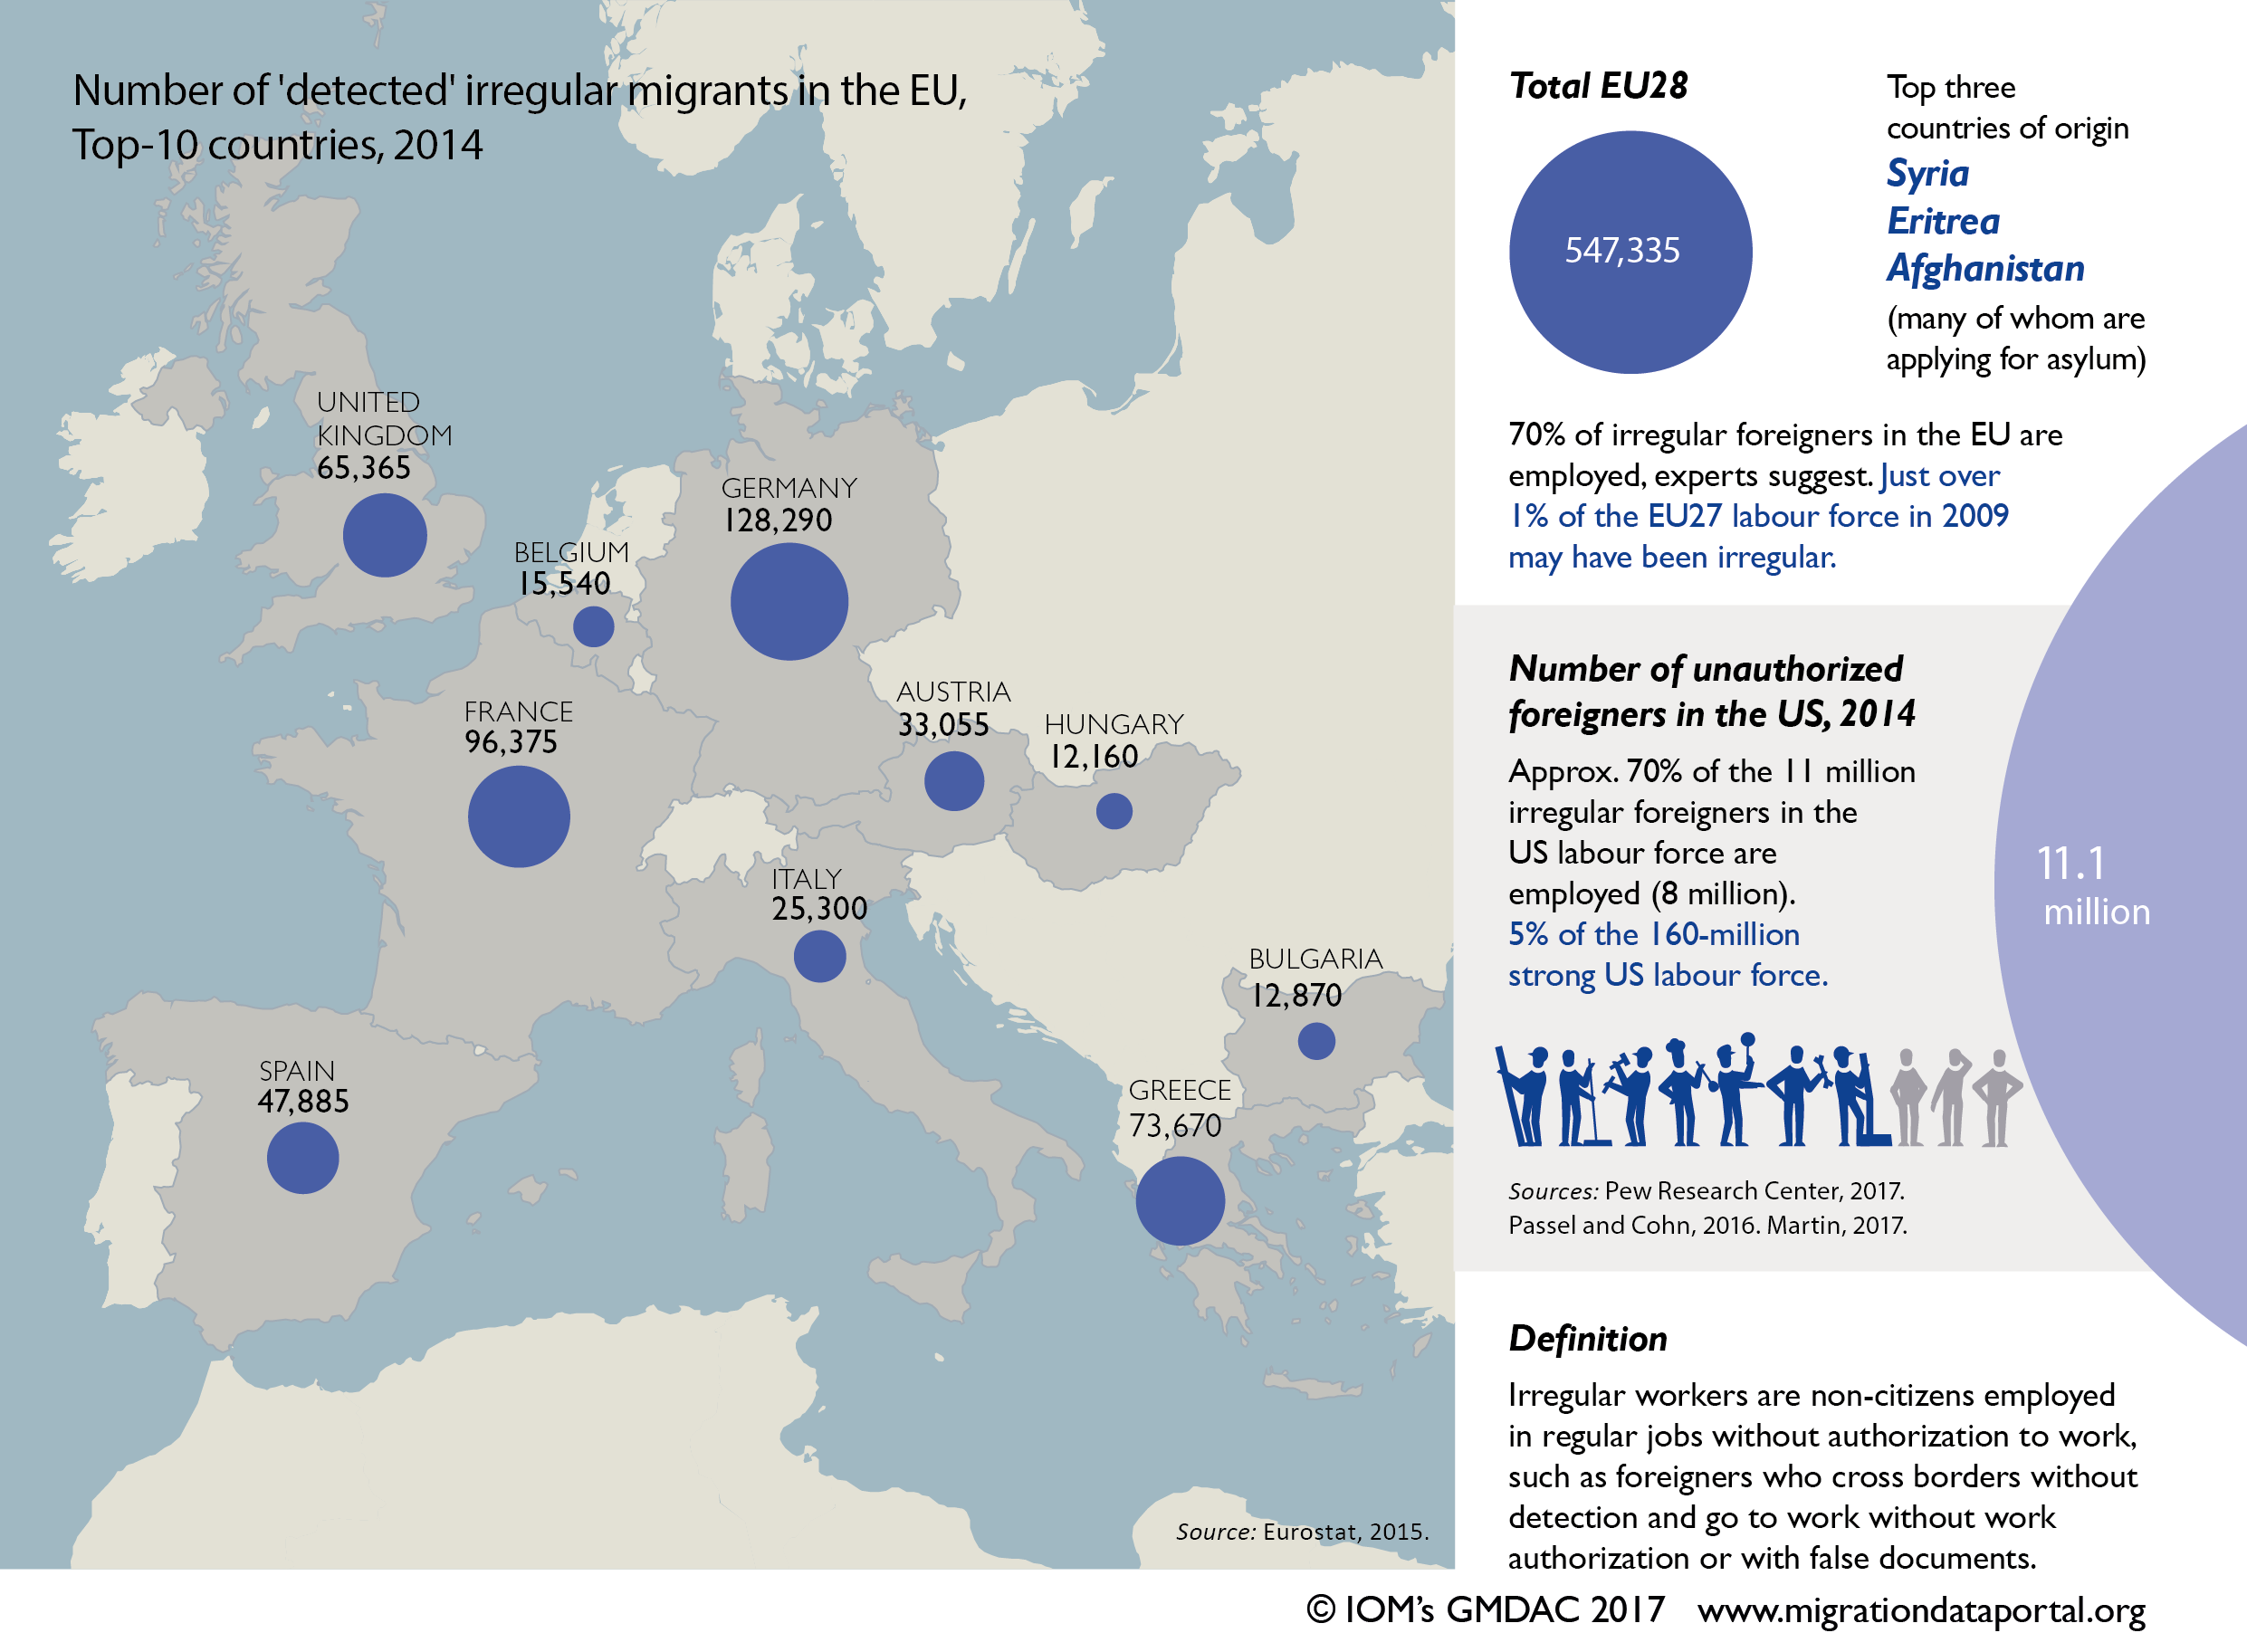 Irregular migrant workers in the EU and the US Migration data portal